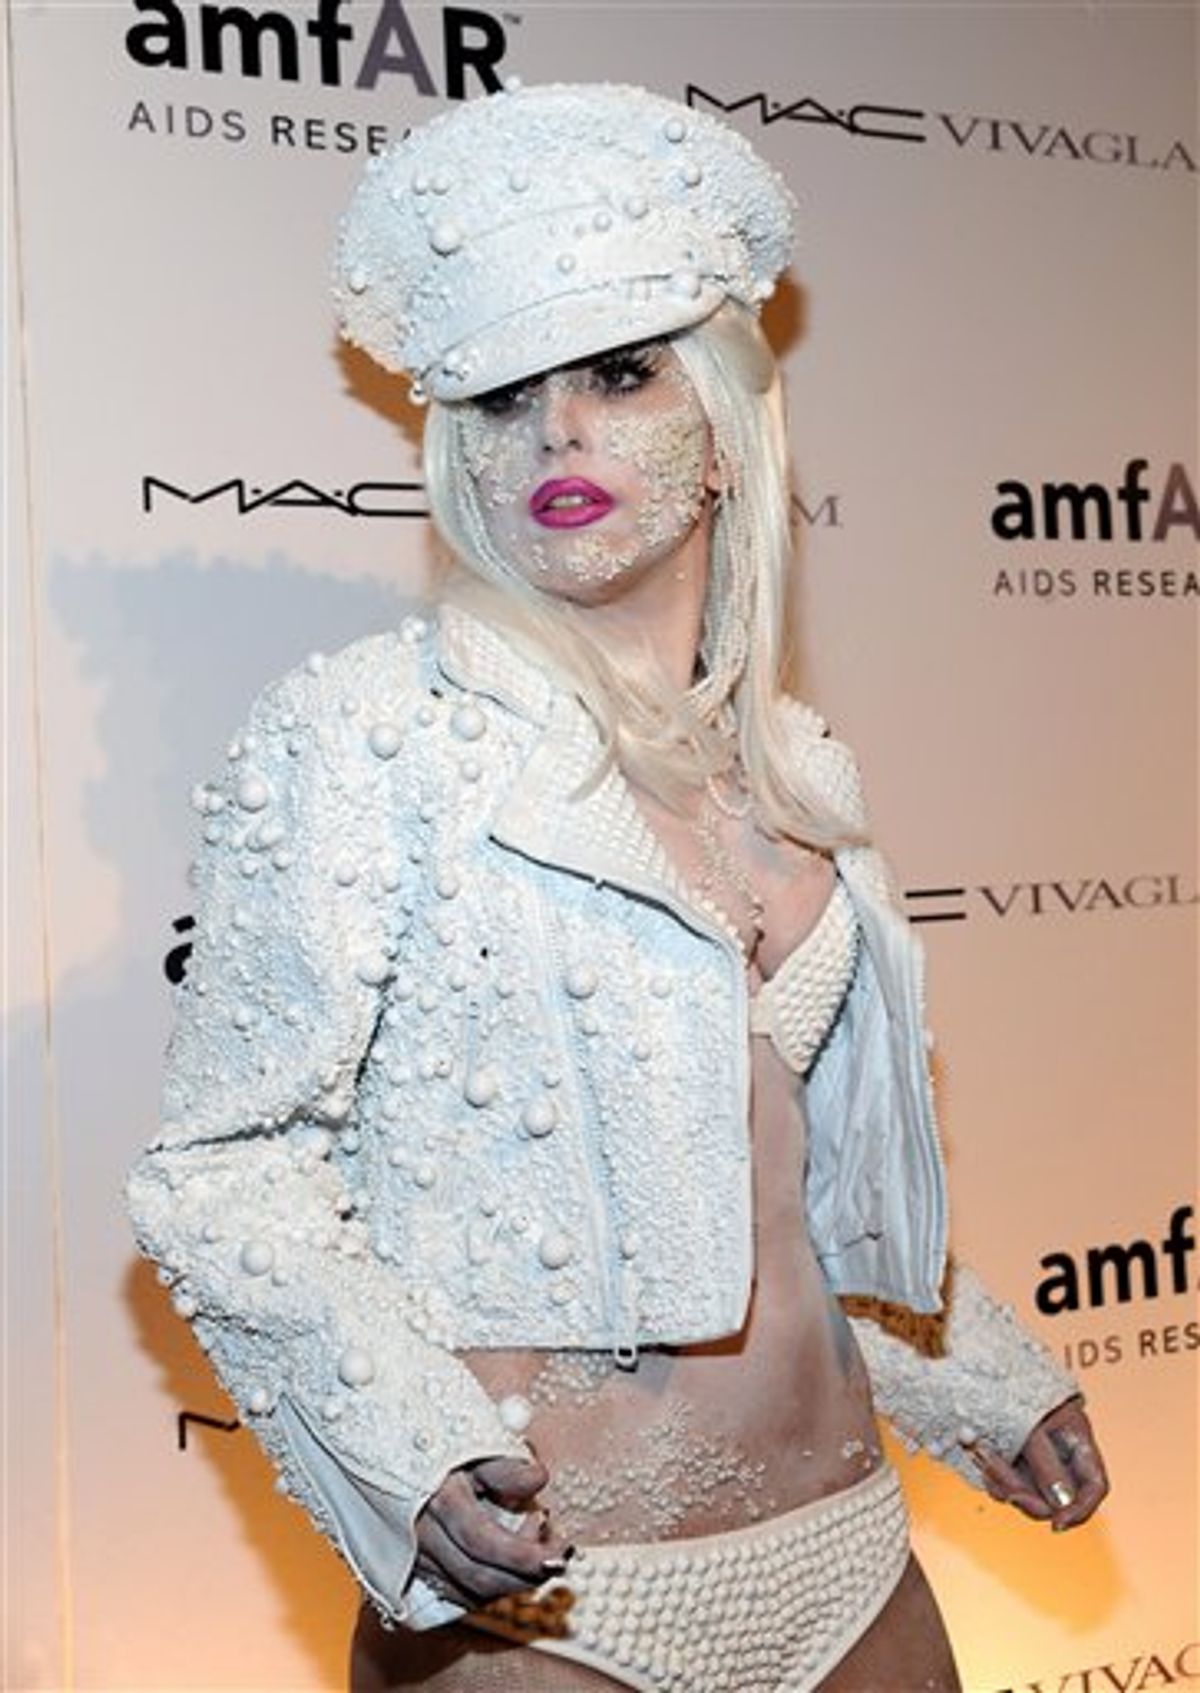 Singer Lady Gaga attends the amfAR (American Foundation for AIDS Research) benefit gala on Wednesday, Feb. 10, 2010 in New York. (AP Photo/Evan Agostini) (AP)